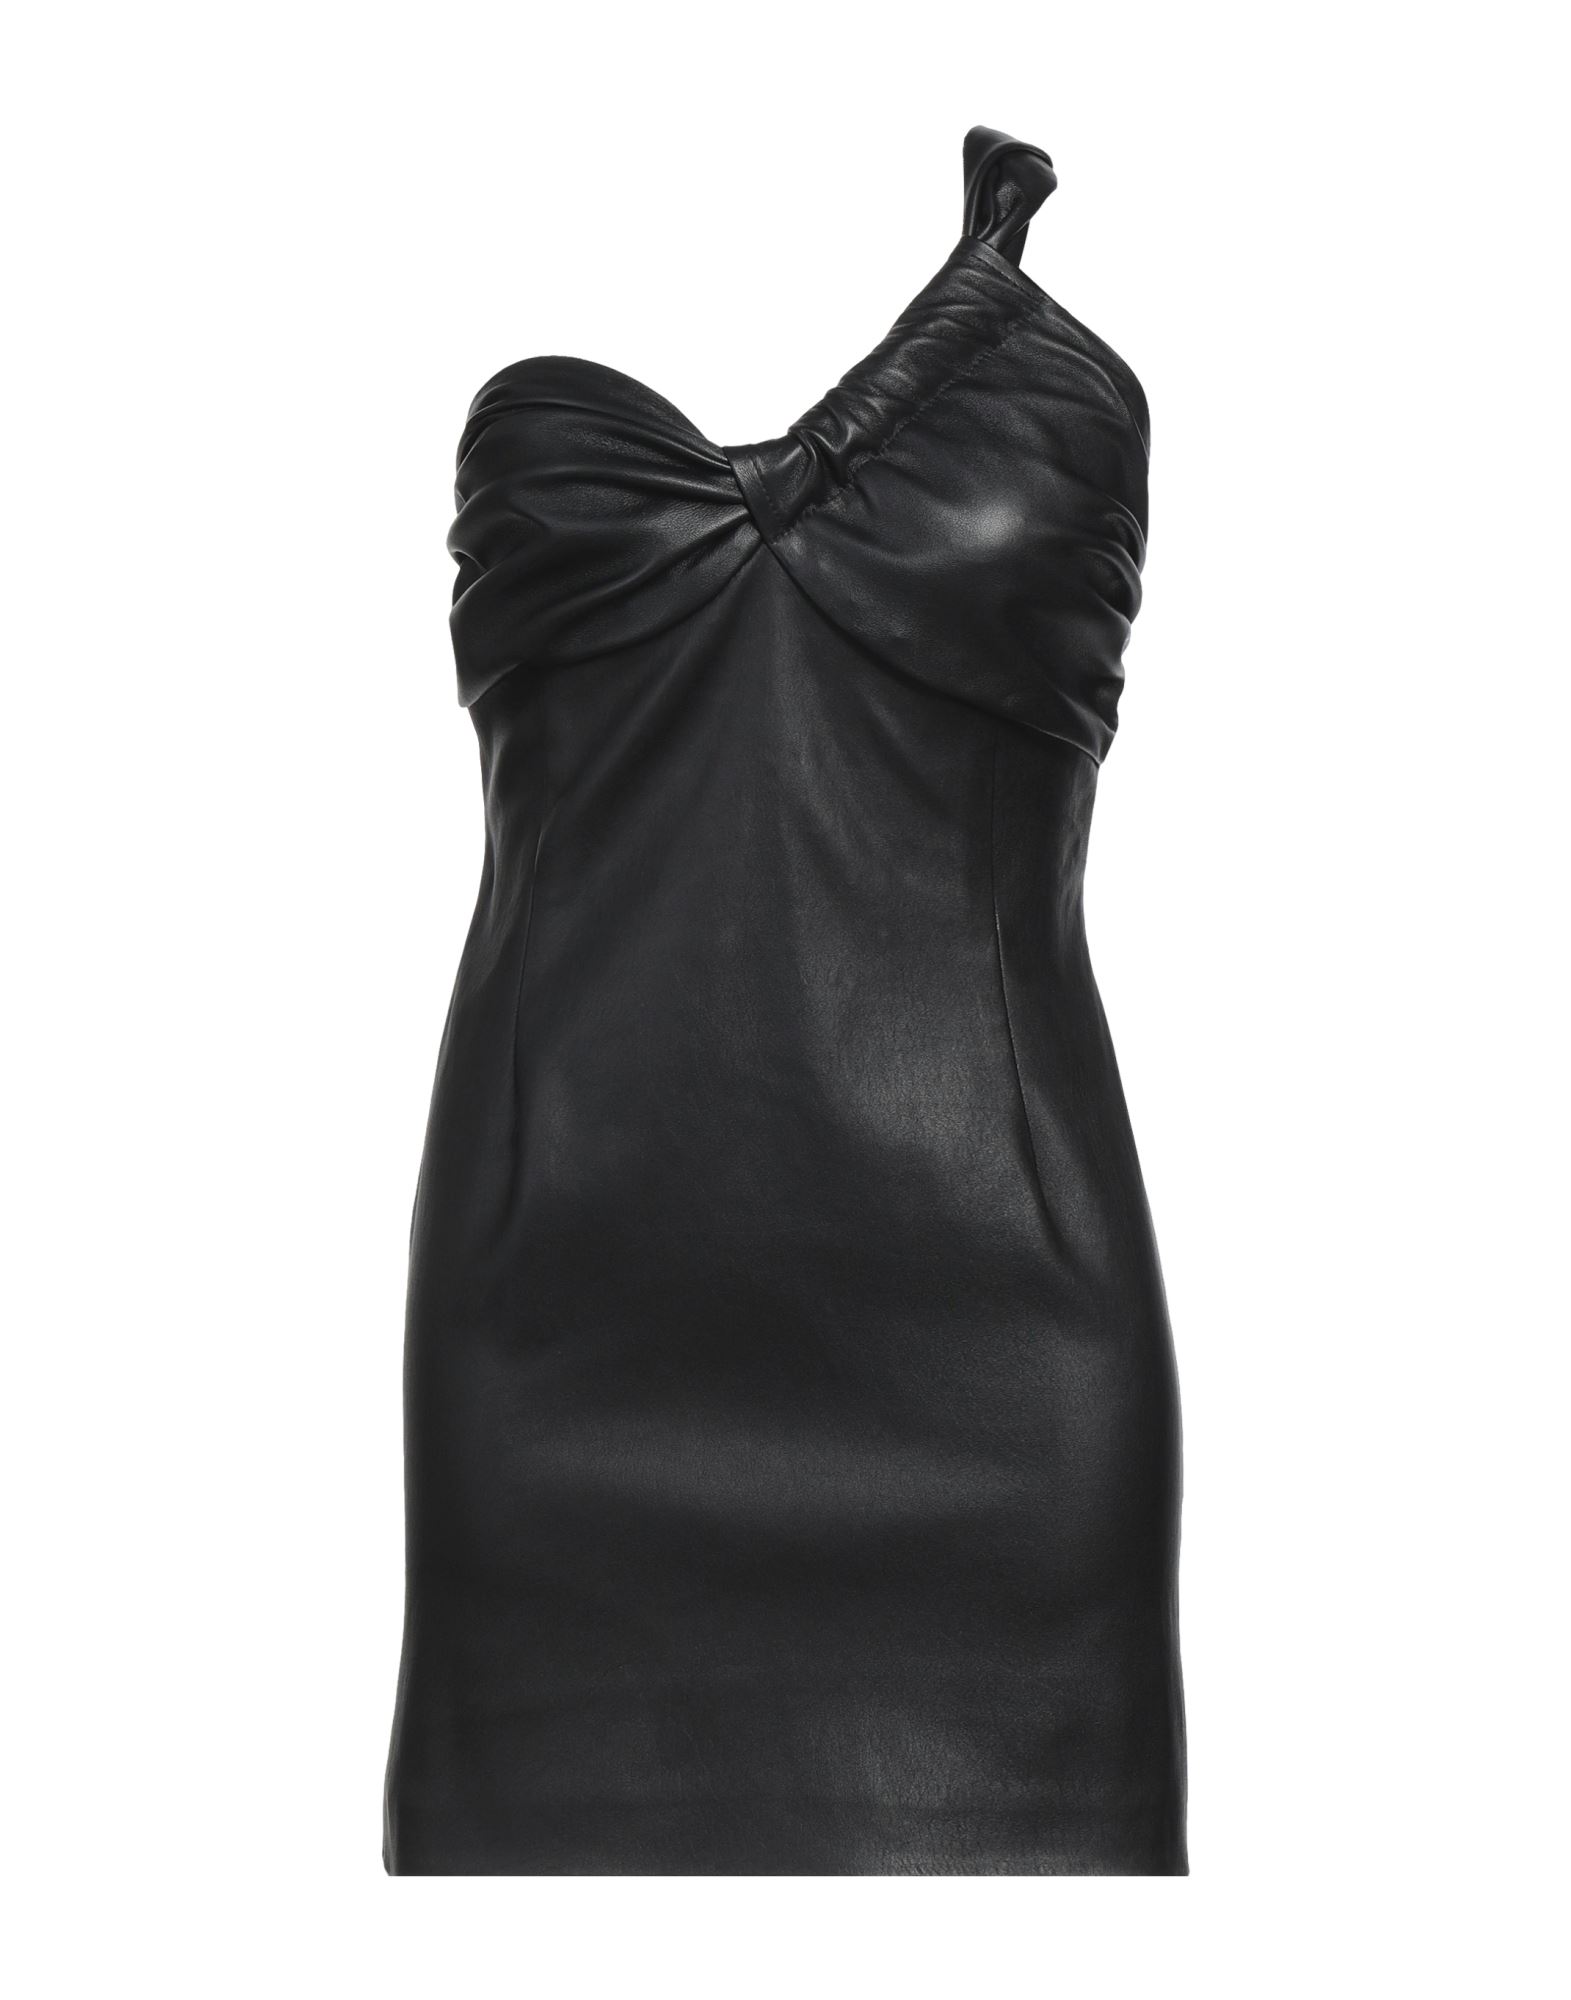 THE MANNEI THE MANNEI WOMAN SHORT DRESS BLACK SIZE 6 SOFT LEATHER, COTTON, ELASTANE, RESIN